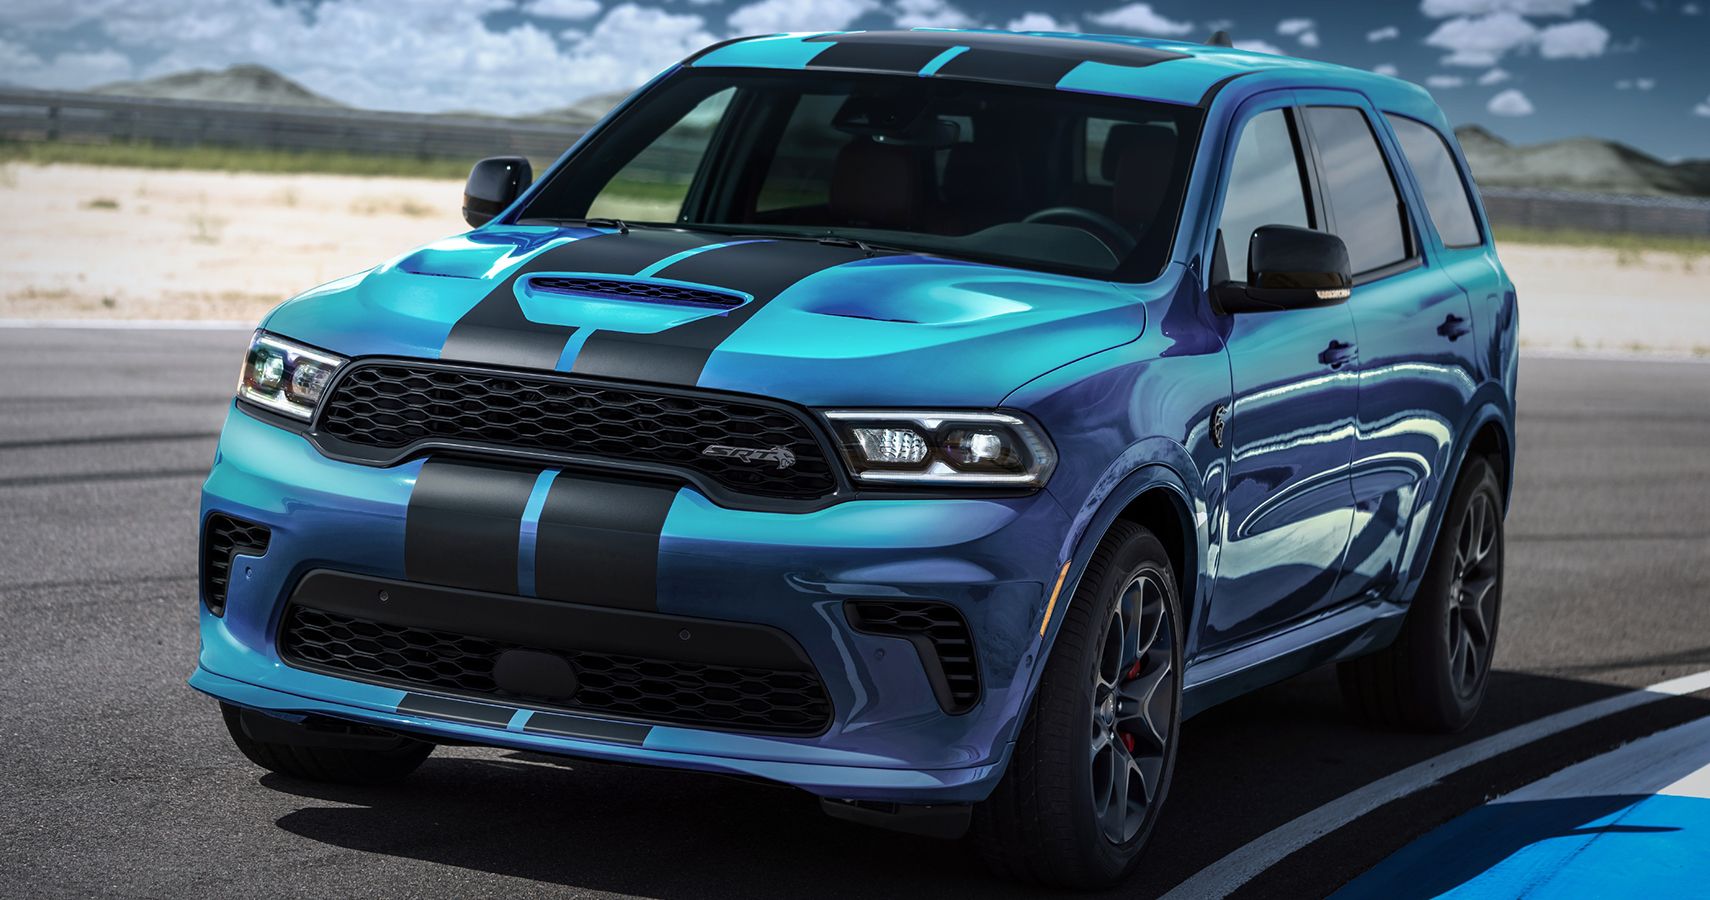 Dodge Durango SRT Hellcat Is Back For 2023 With New Colors